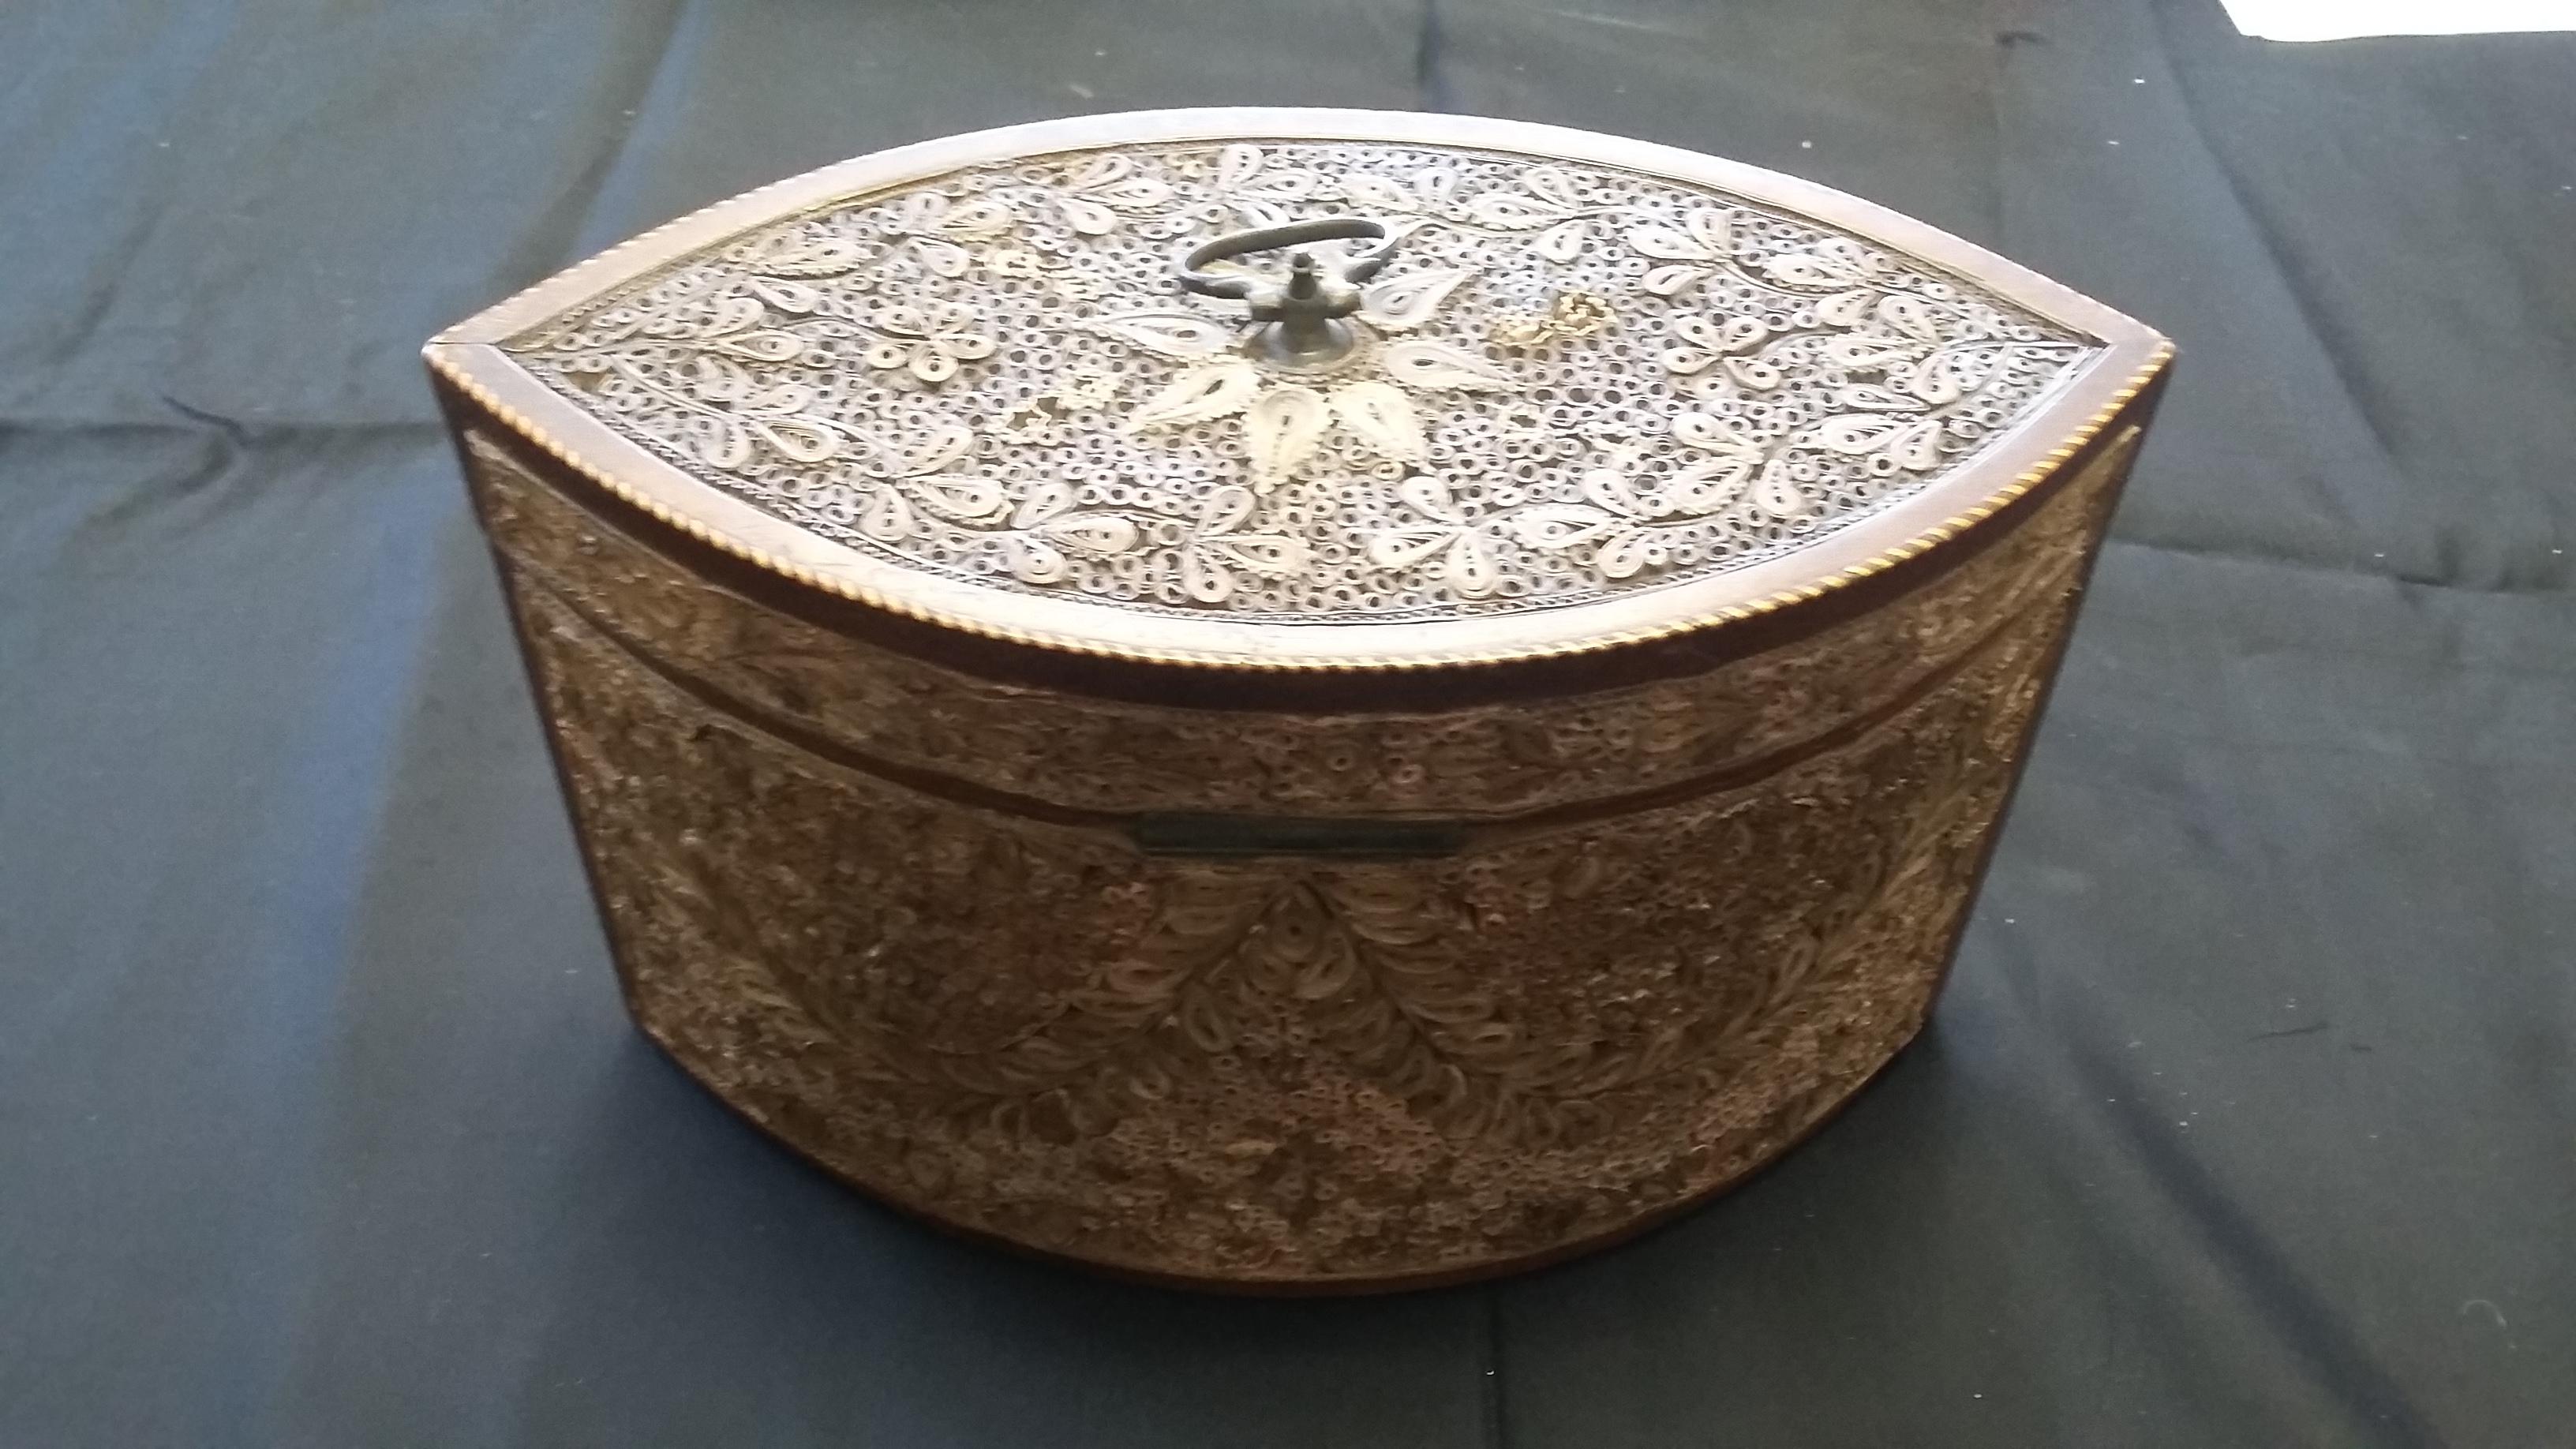 Late 18th Century tea caddy, circa 1790. A very intricately detailed oval box, meticulously made from 